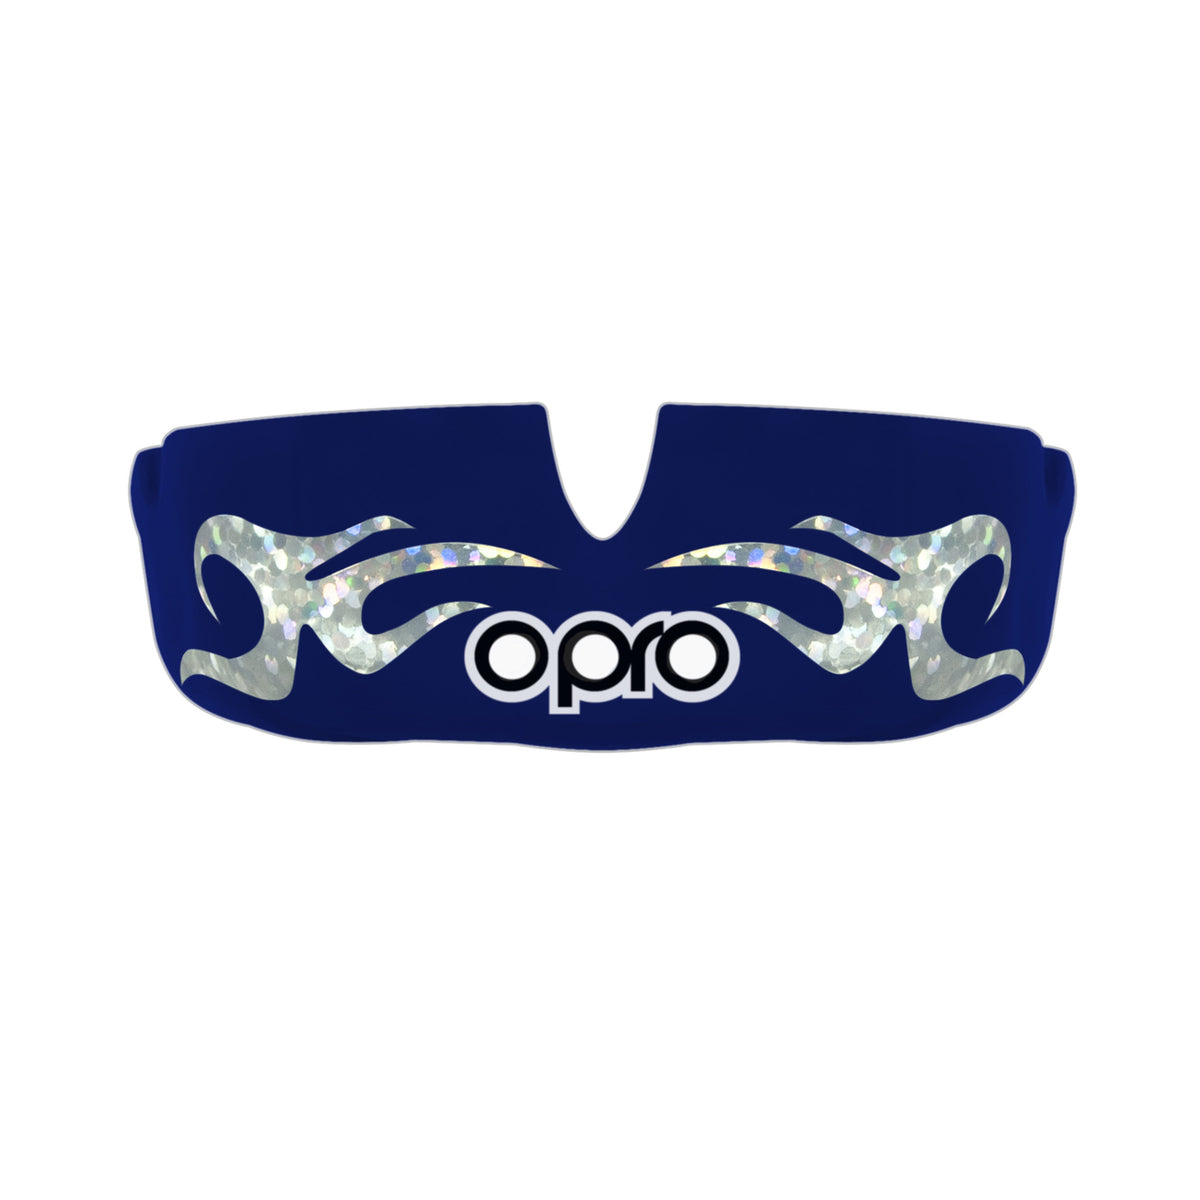 Opro Power Fit Bling Urban Mouth Guard Dark Blue/White